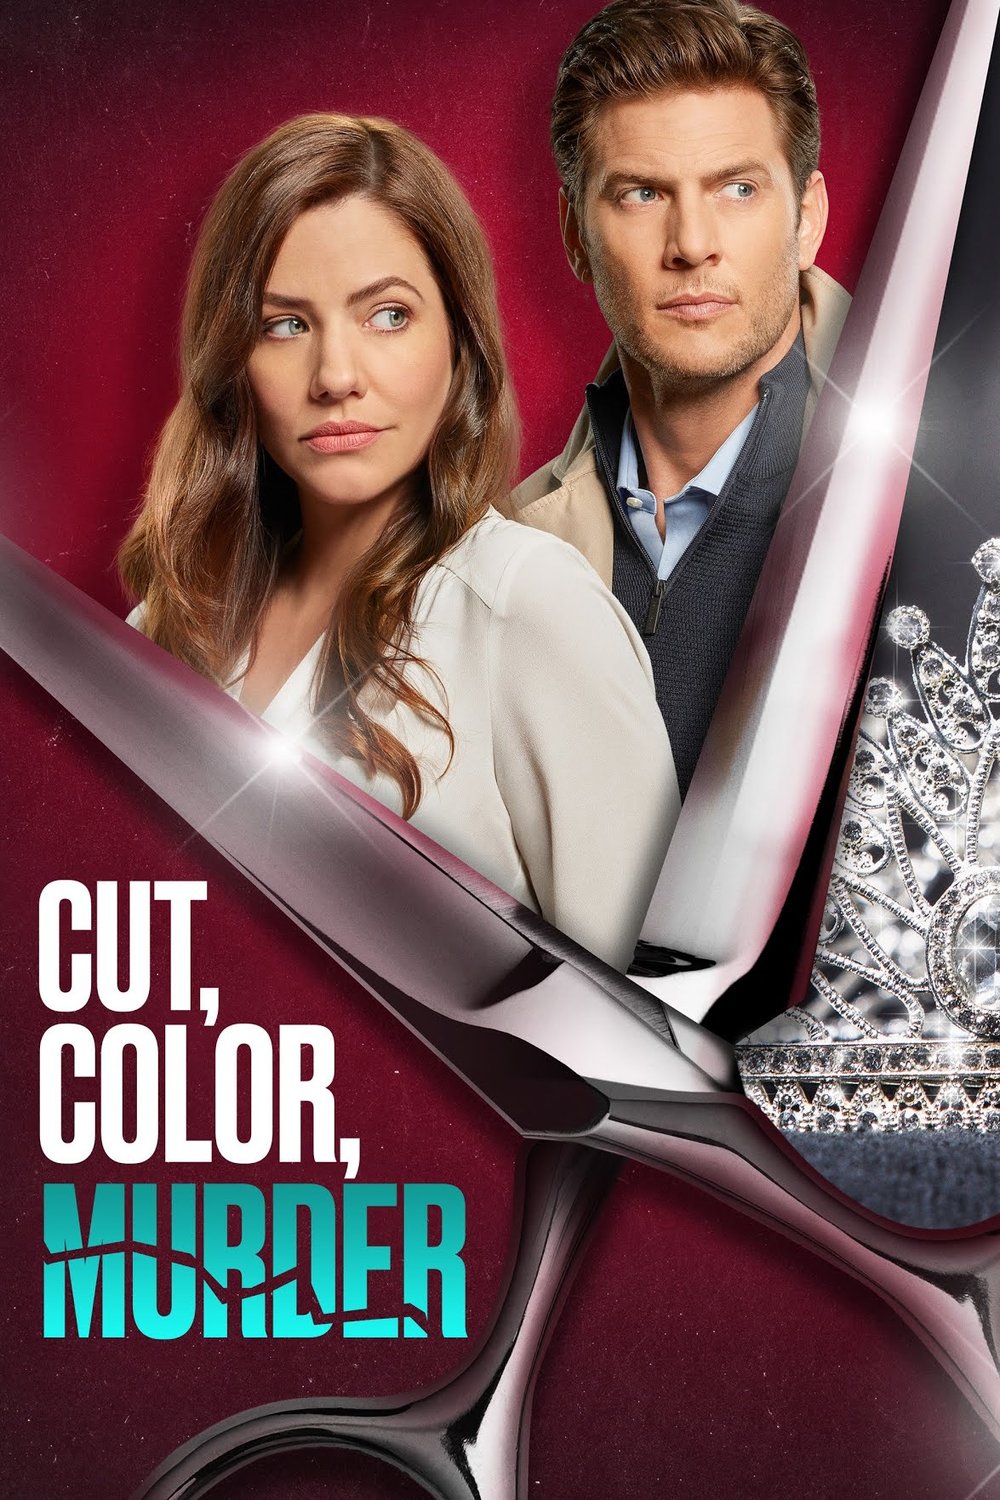 Poster of the movie Cut, Color, Murder